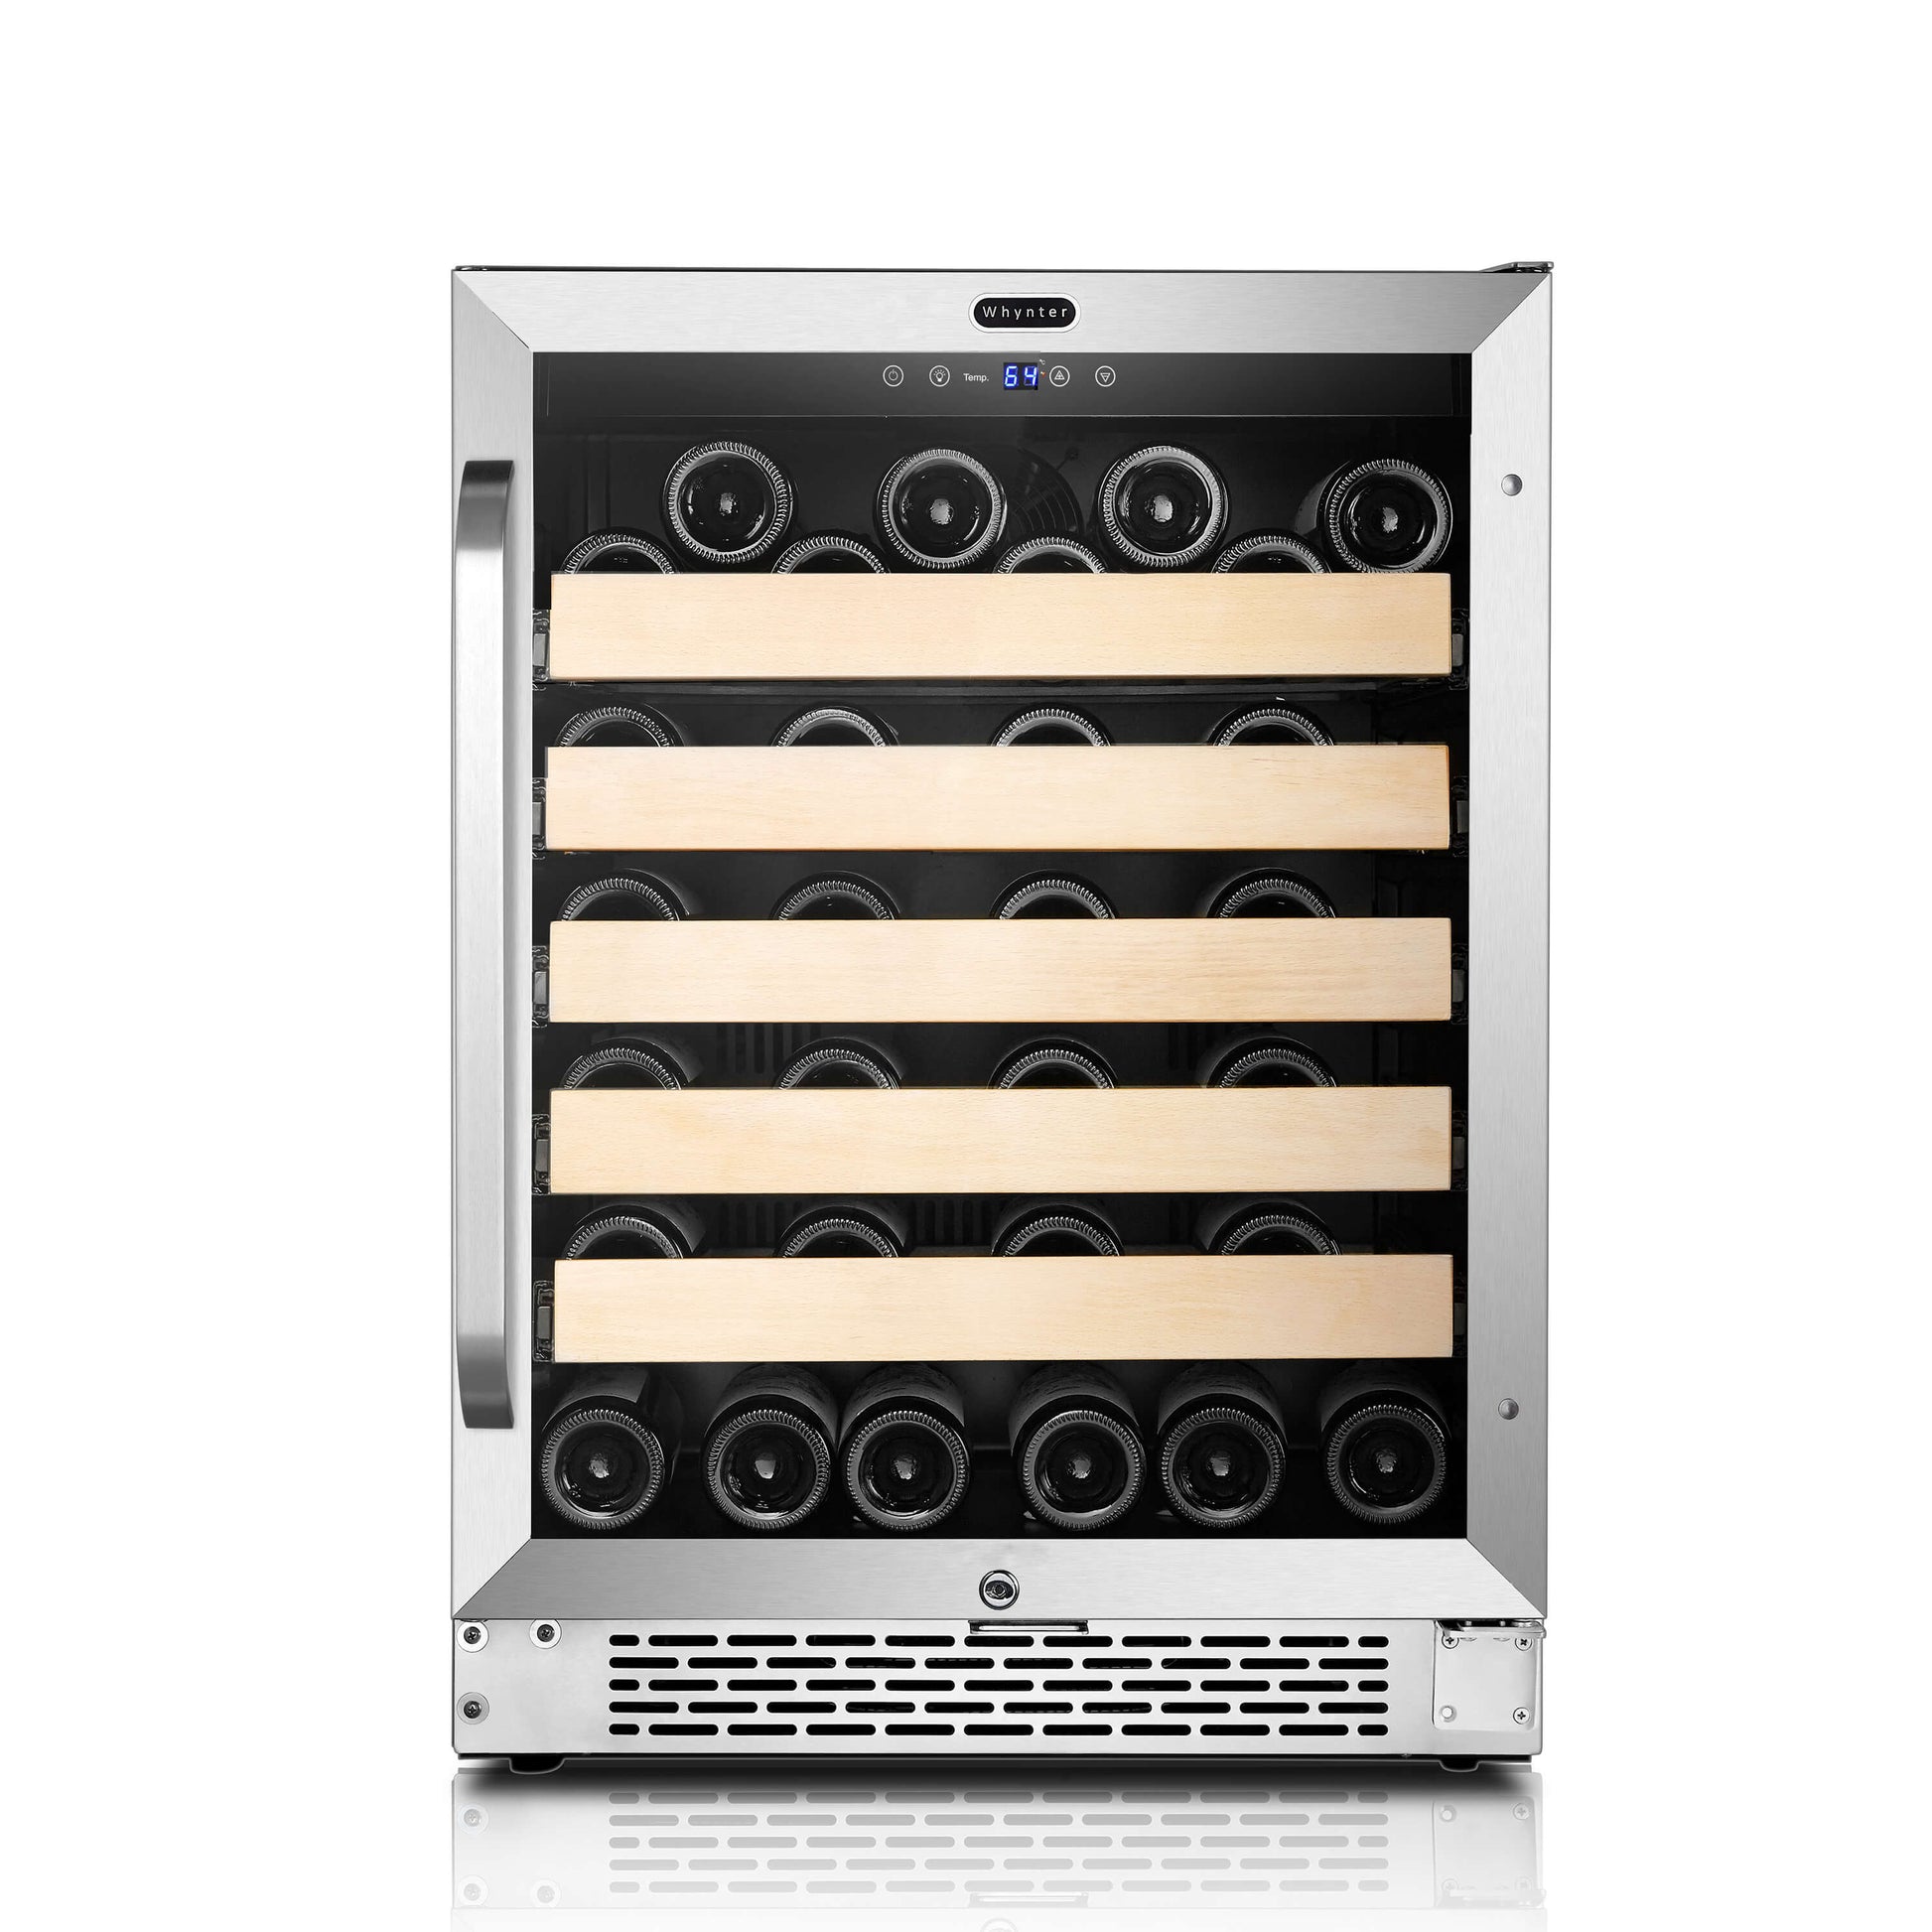 Whynter BWR-541STS/BWR-541STSa 24? Built-In Stainless Steel 54 Bottle Wine Refrigerator Cooler